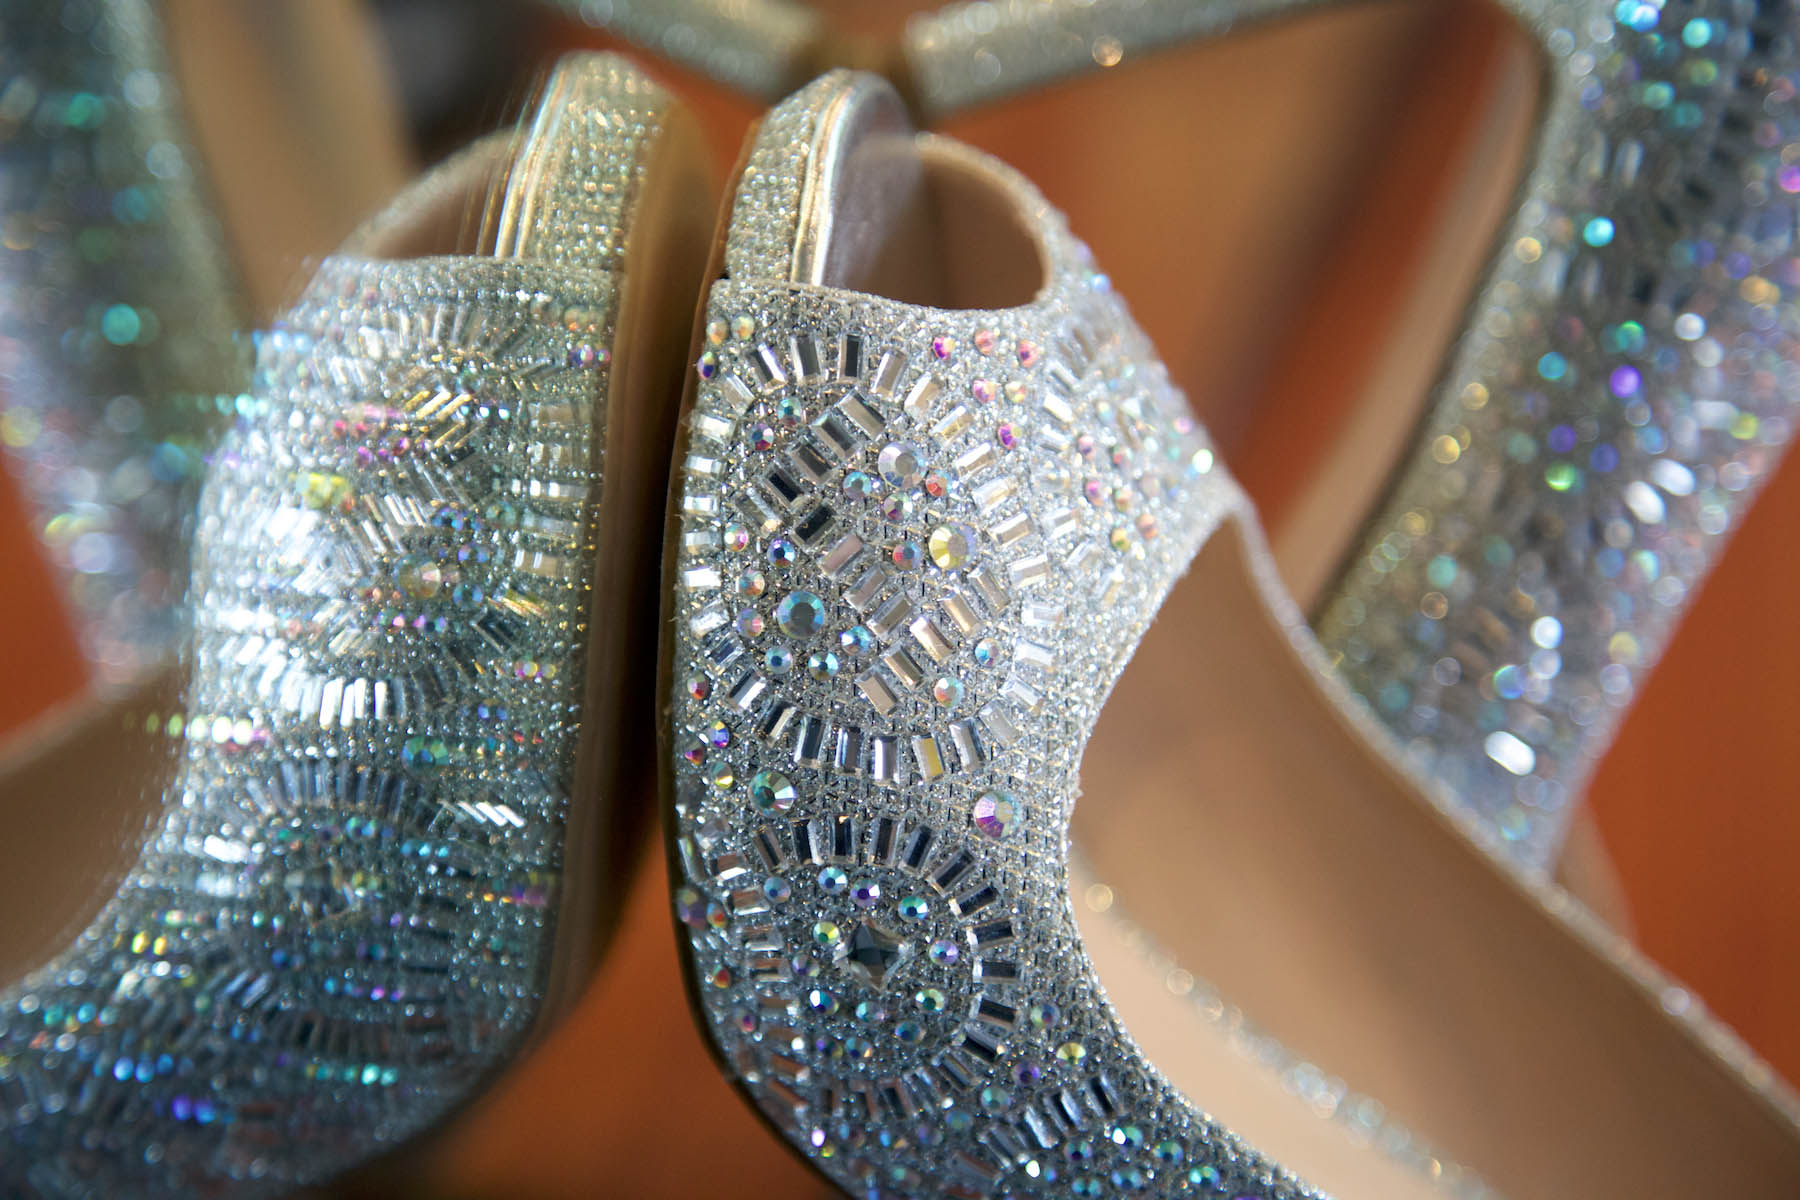 Alissa's sparkly shoes for her wedding day. Wedding pictures by Tiffany & Steve of Warmowski Photography. 